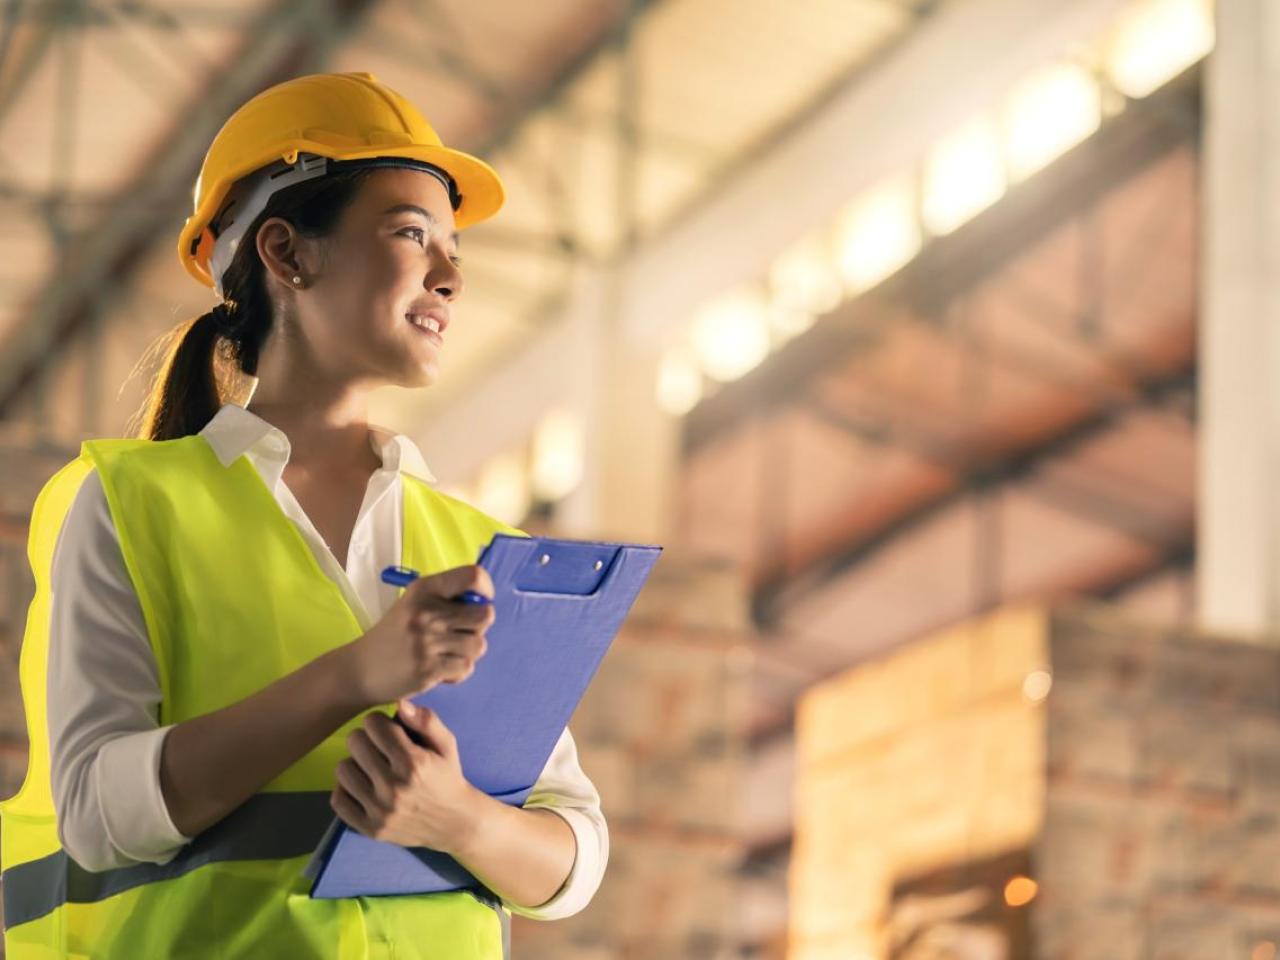 Woman wearing hard hat and holding clipboard